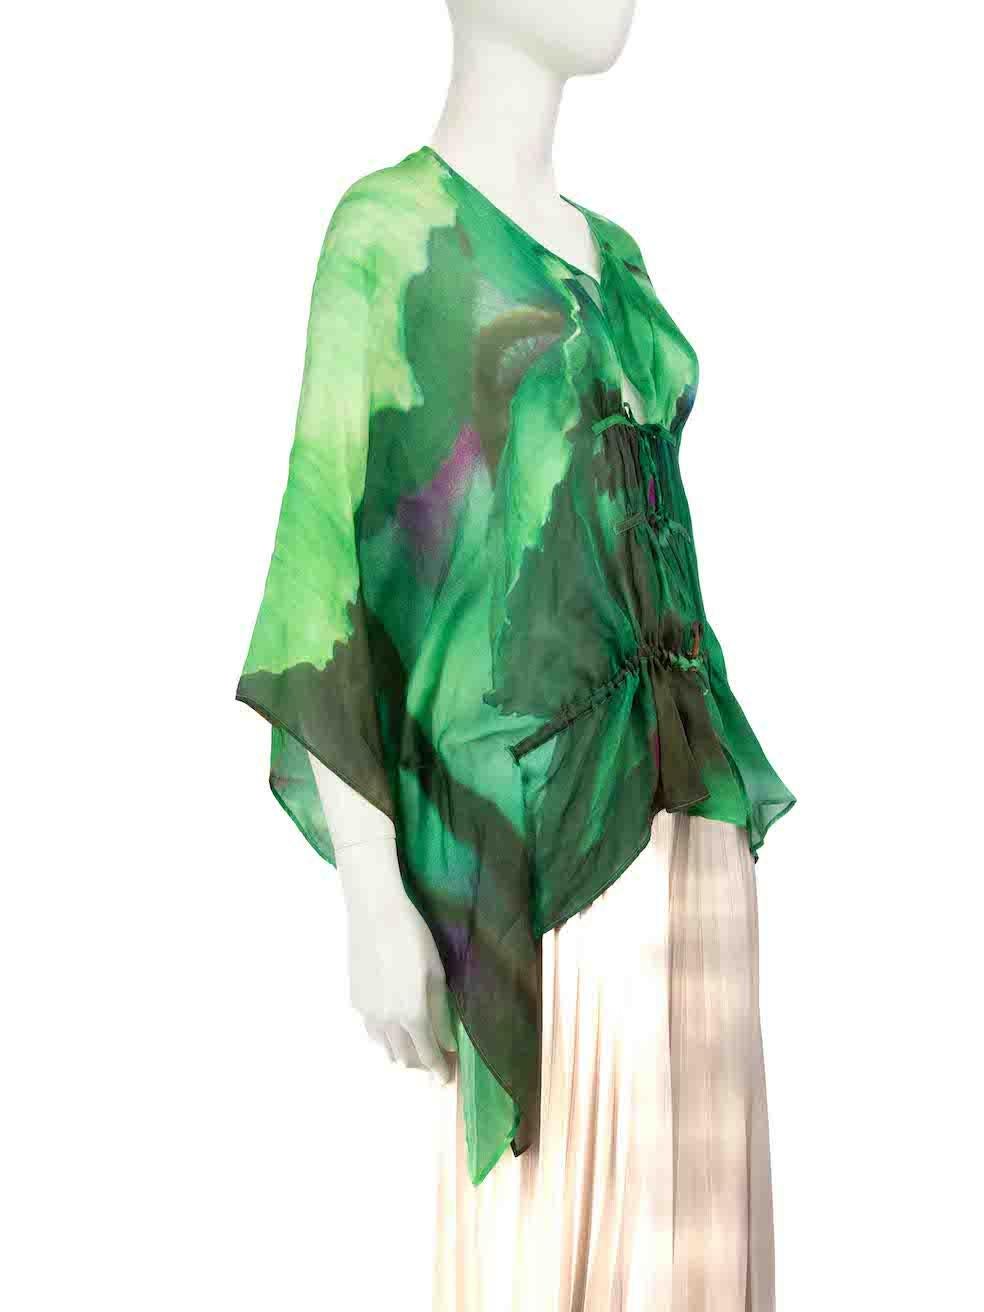 CONDITION is Never worn. No visible wear to top is evident. However, the size label is missing on this new Roberto Cavalli designer resale item.
 
 
 
 Details
 
 
 Green
 
 Silk
 
 Mid sleeves top
 
 Watercolour print
 
 Draped accent
 
 Sheer
 
